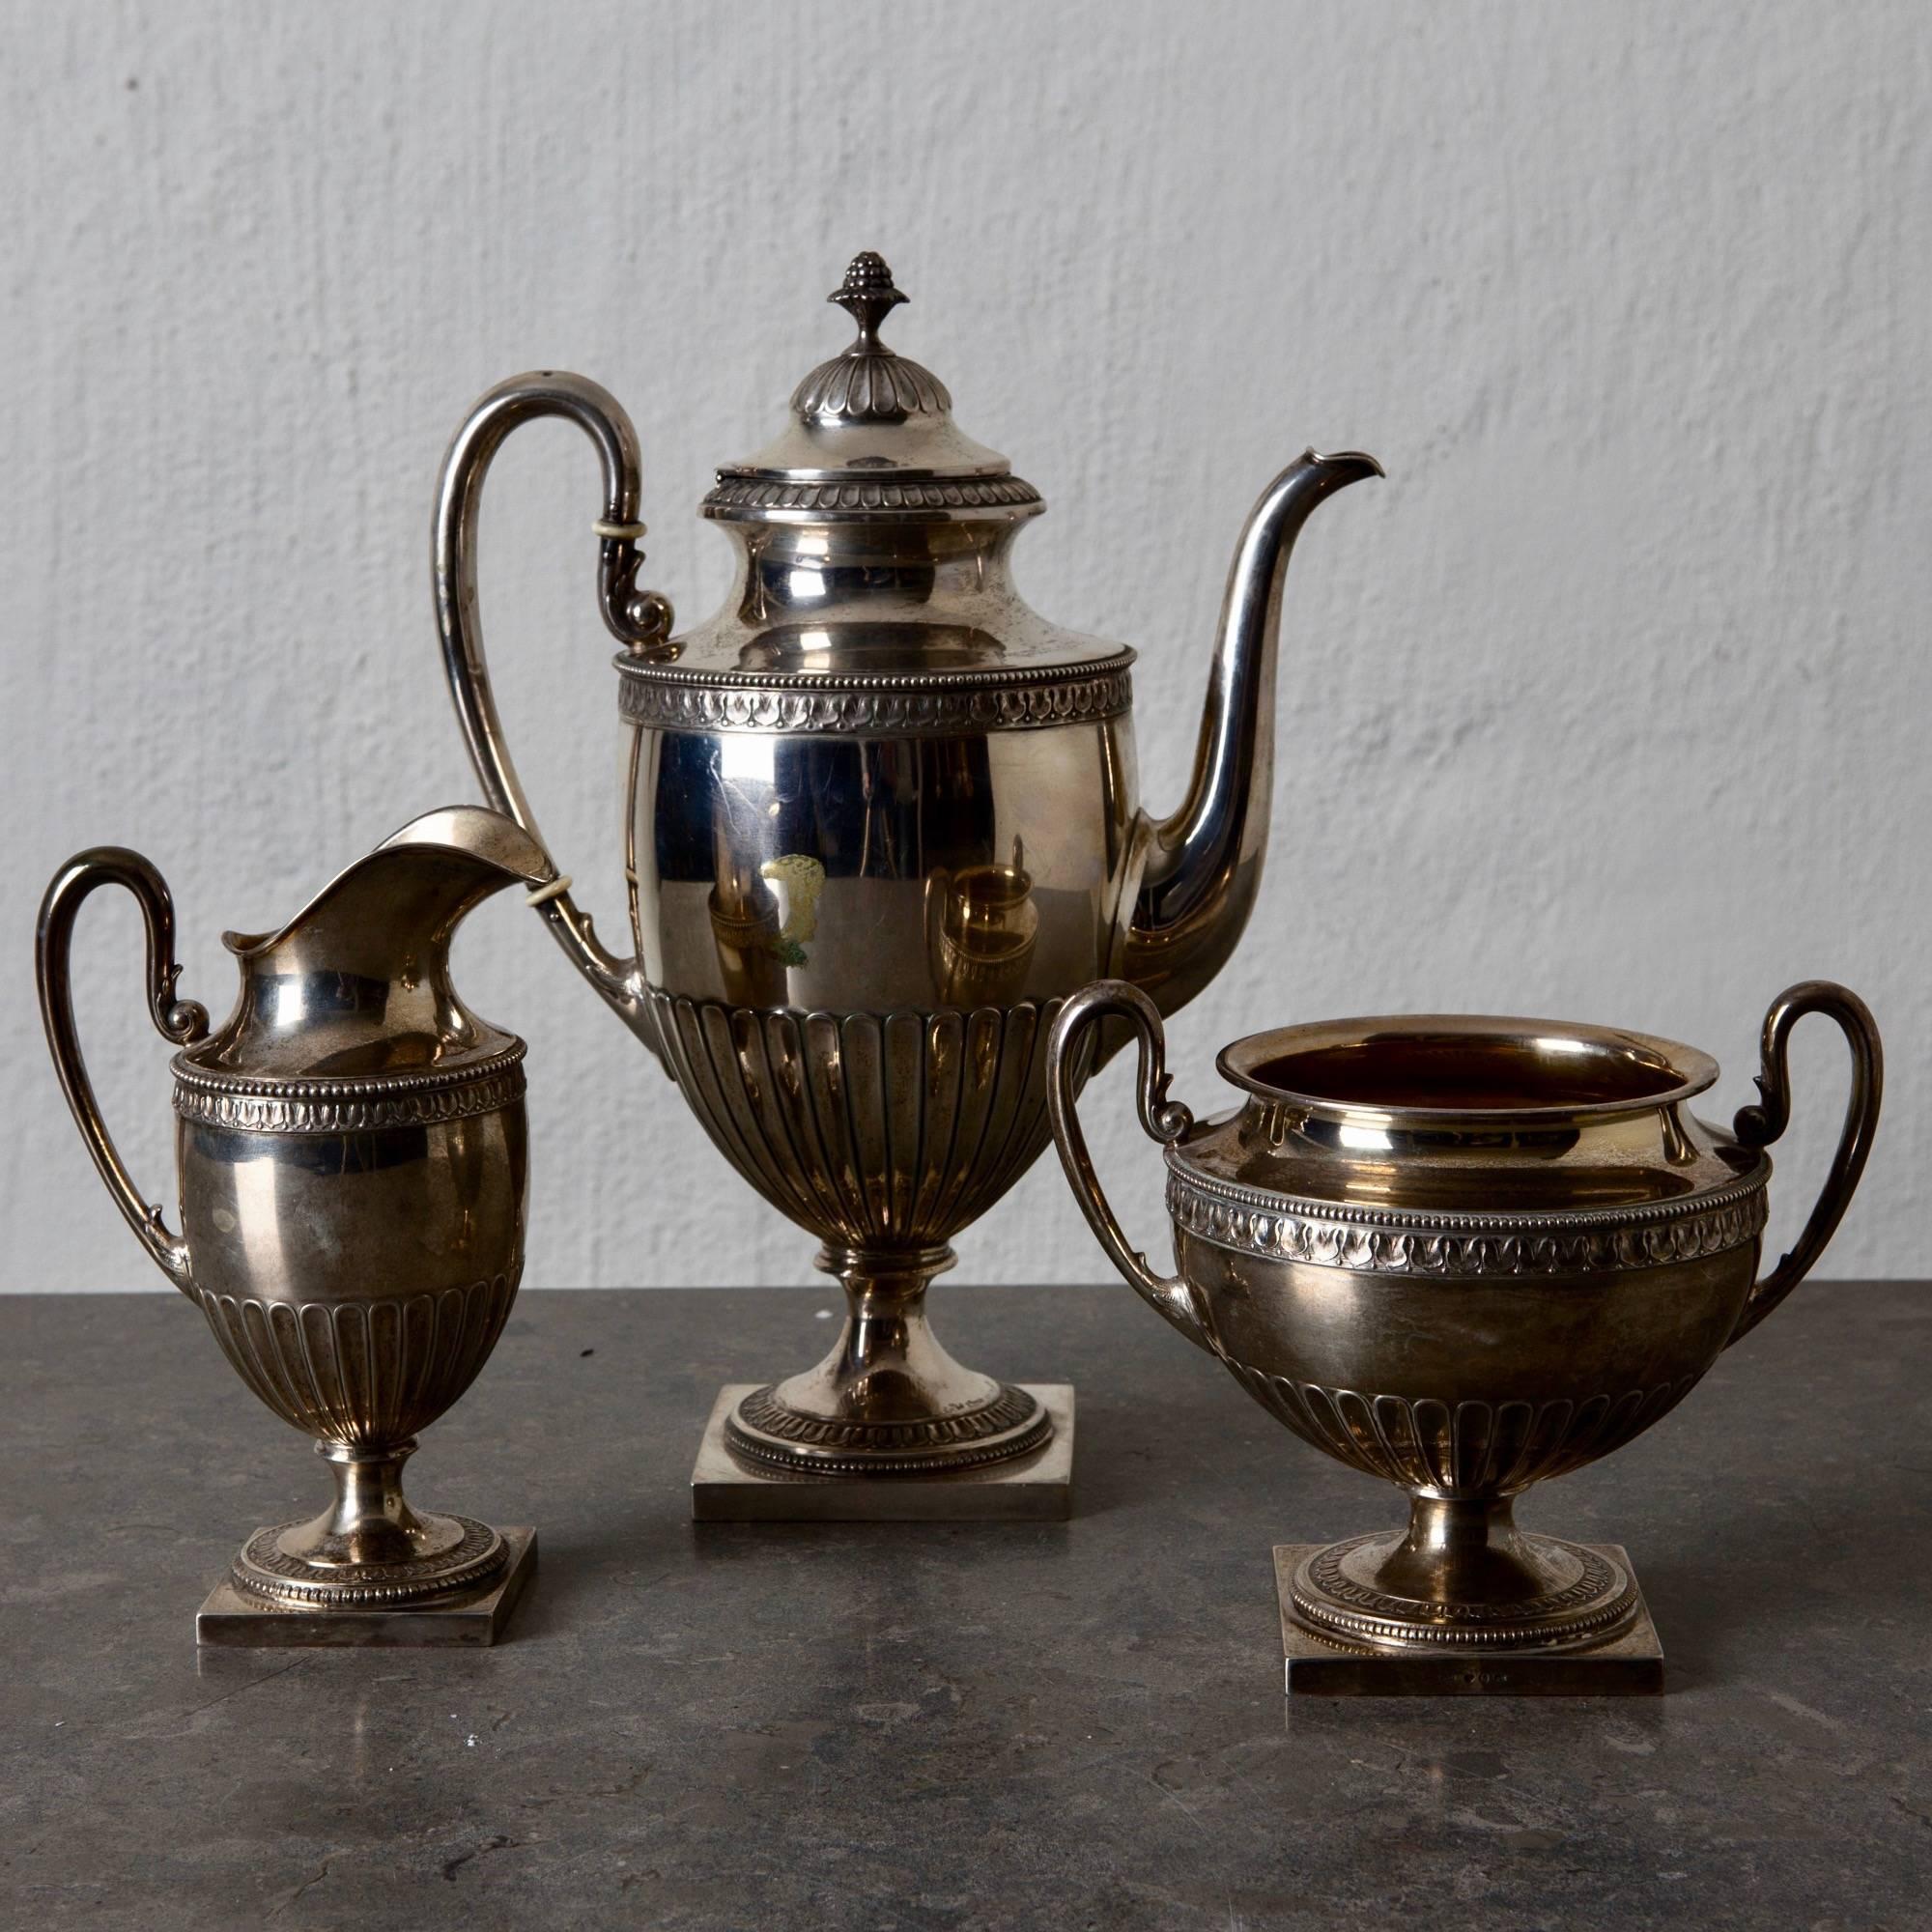 A coffee set made during the early 1900s (1902-1903) in Sweden. Stamped CG Hallberg.